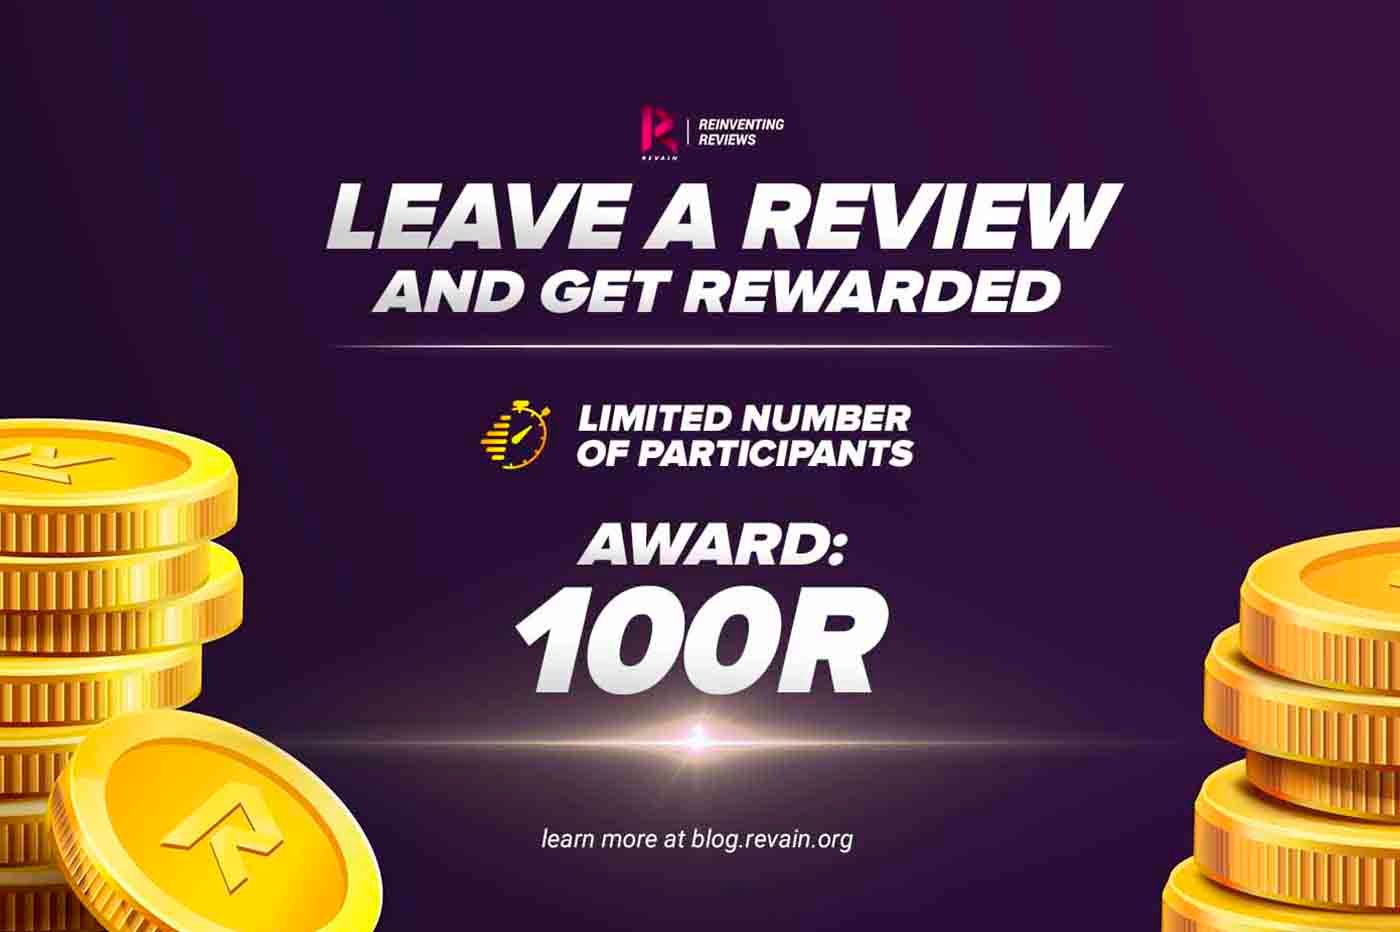 Revain gives away 100 R tokens for writing a review. Join!